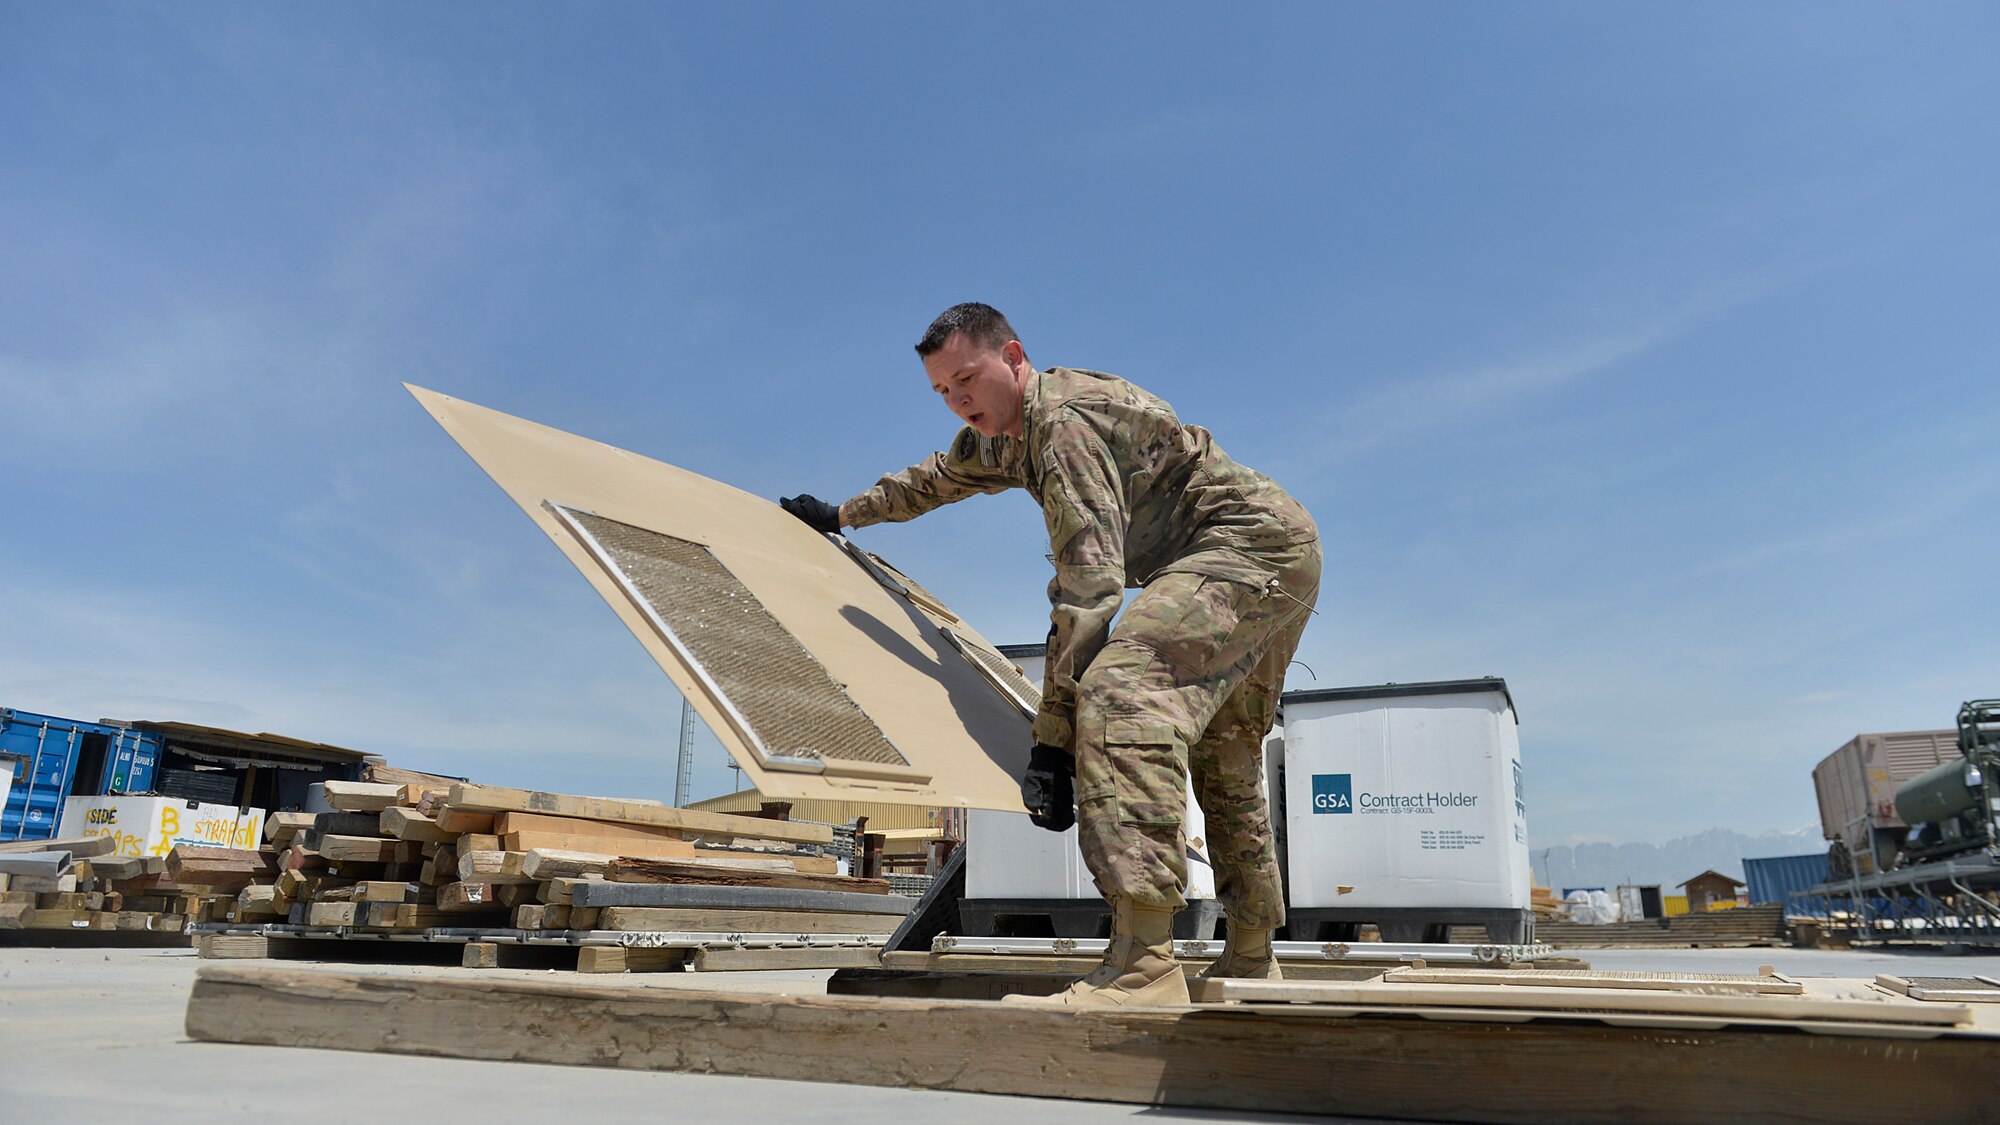 Staff Sgt. Marcin Vande Hei, 455th Expeditionary Logistics Readiness Squadron Central Command Materiel Recovery Element non-commissioned officer-in-charge lifts equipment panels May 2, 2014 at Bagram Airfield, Afghanistan.  Vande Hei, is part of a CMRE team that is responsible for identifying, storing and redeploying assets to the U.S. or disposing of items located throughout the region. The CMRE team has helped recover more than 60 pieces of equipment worth about $1.66 million within the last eight months. Vande Hei is a native of Washington, D.C. and is deployed from Langley Air Force Base, Va. (U.S. Air Force by Staff Sgt. Evelyn Chavez/Released)